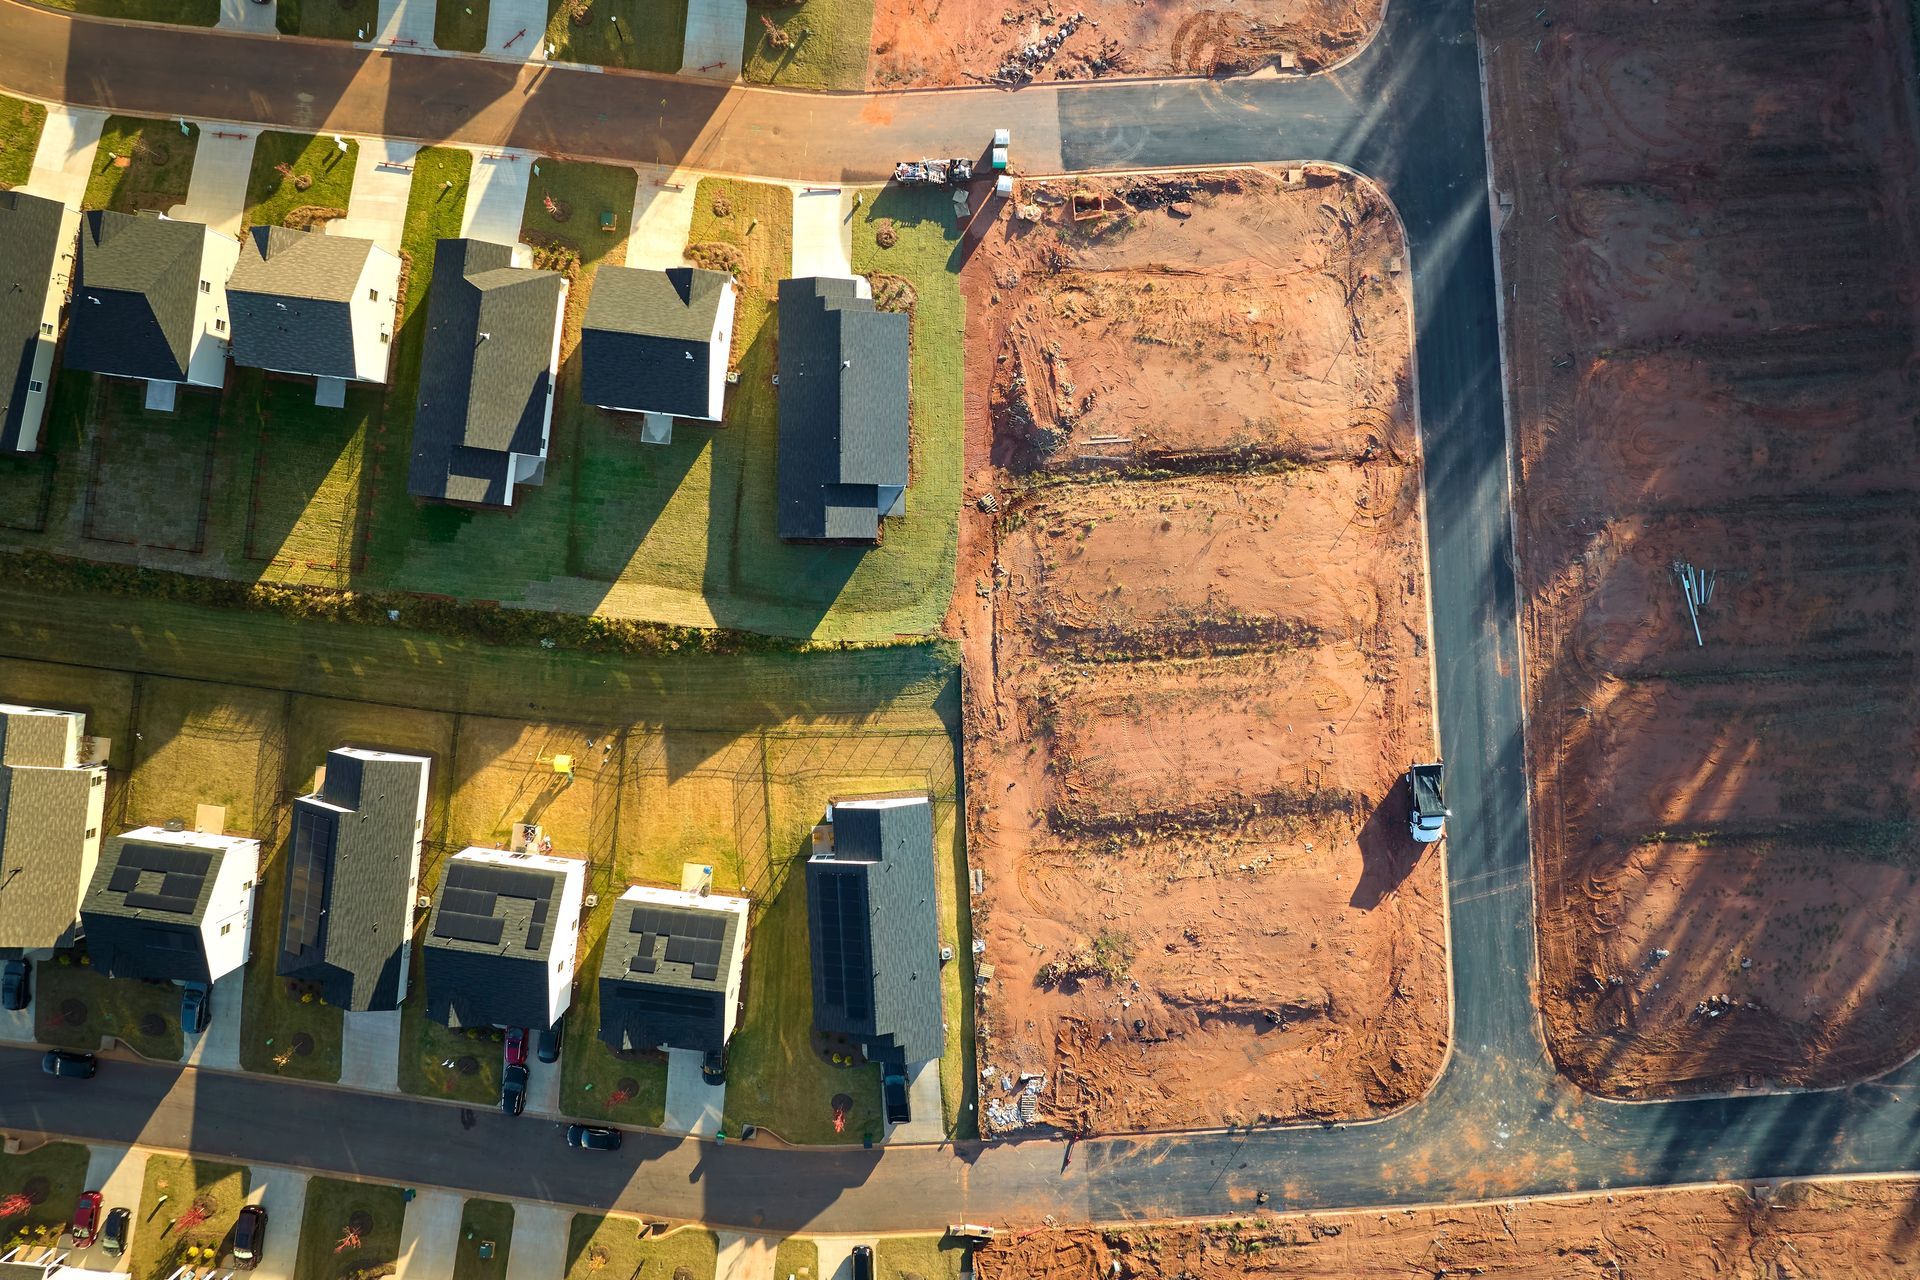 View from above of densely built residential houses under construction